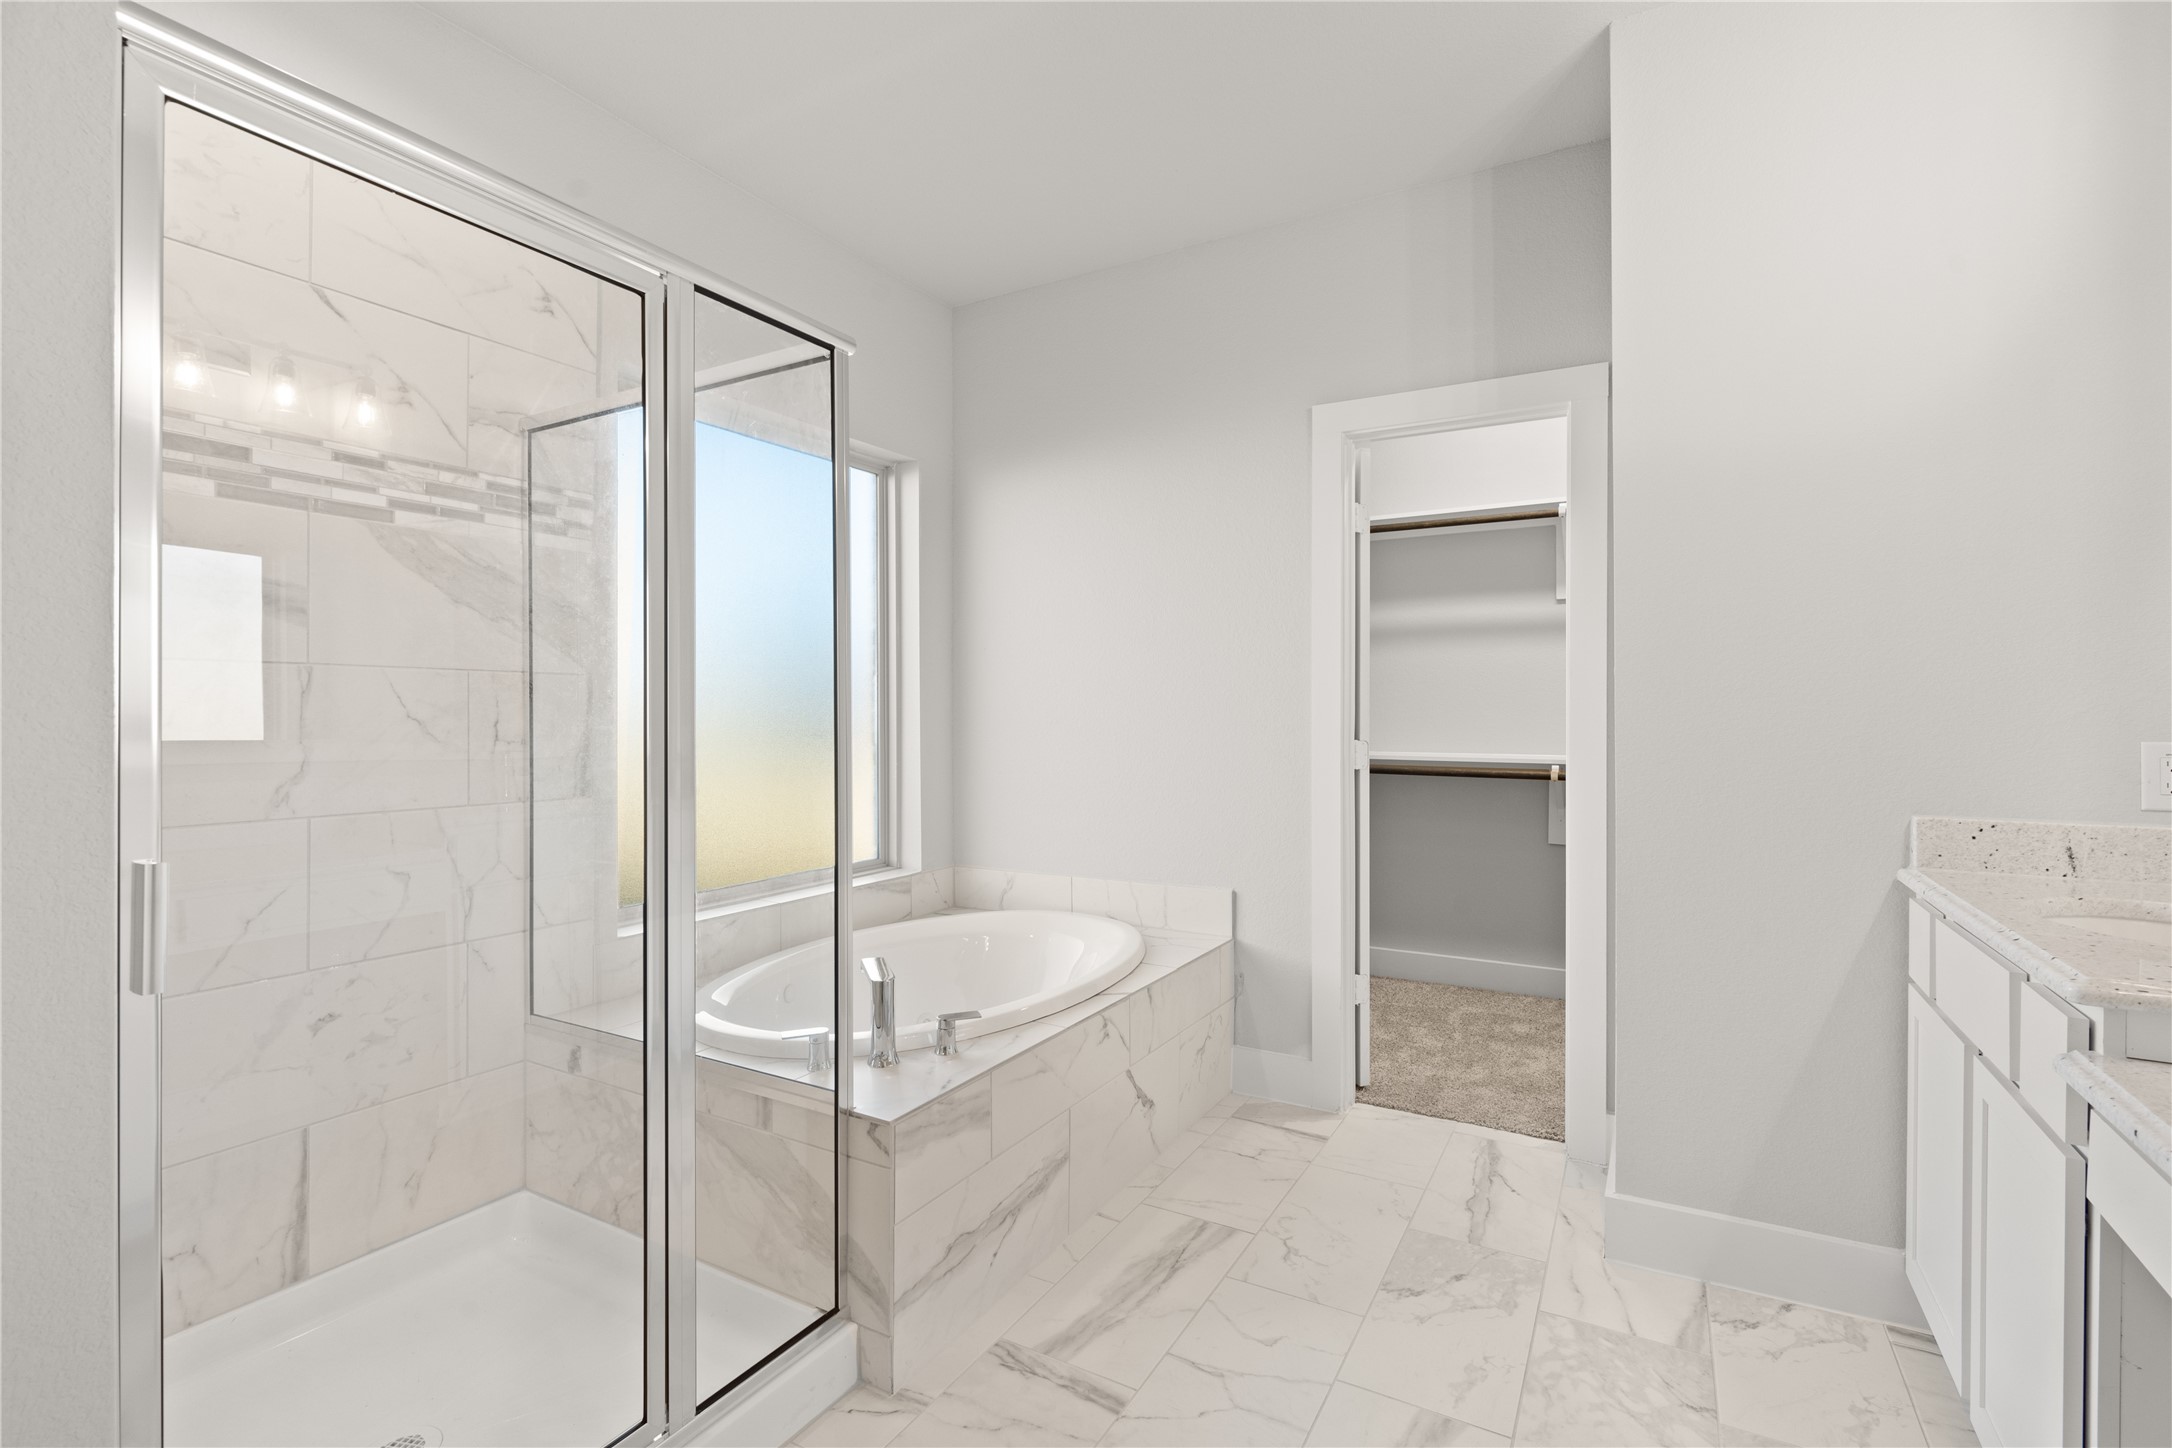 This additional view of the primary bath showcased the walk-in shower with tile surround and separate garden tub perfect for soaking after a long day.